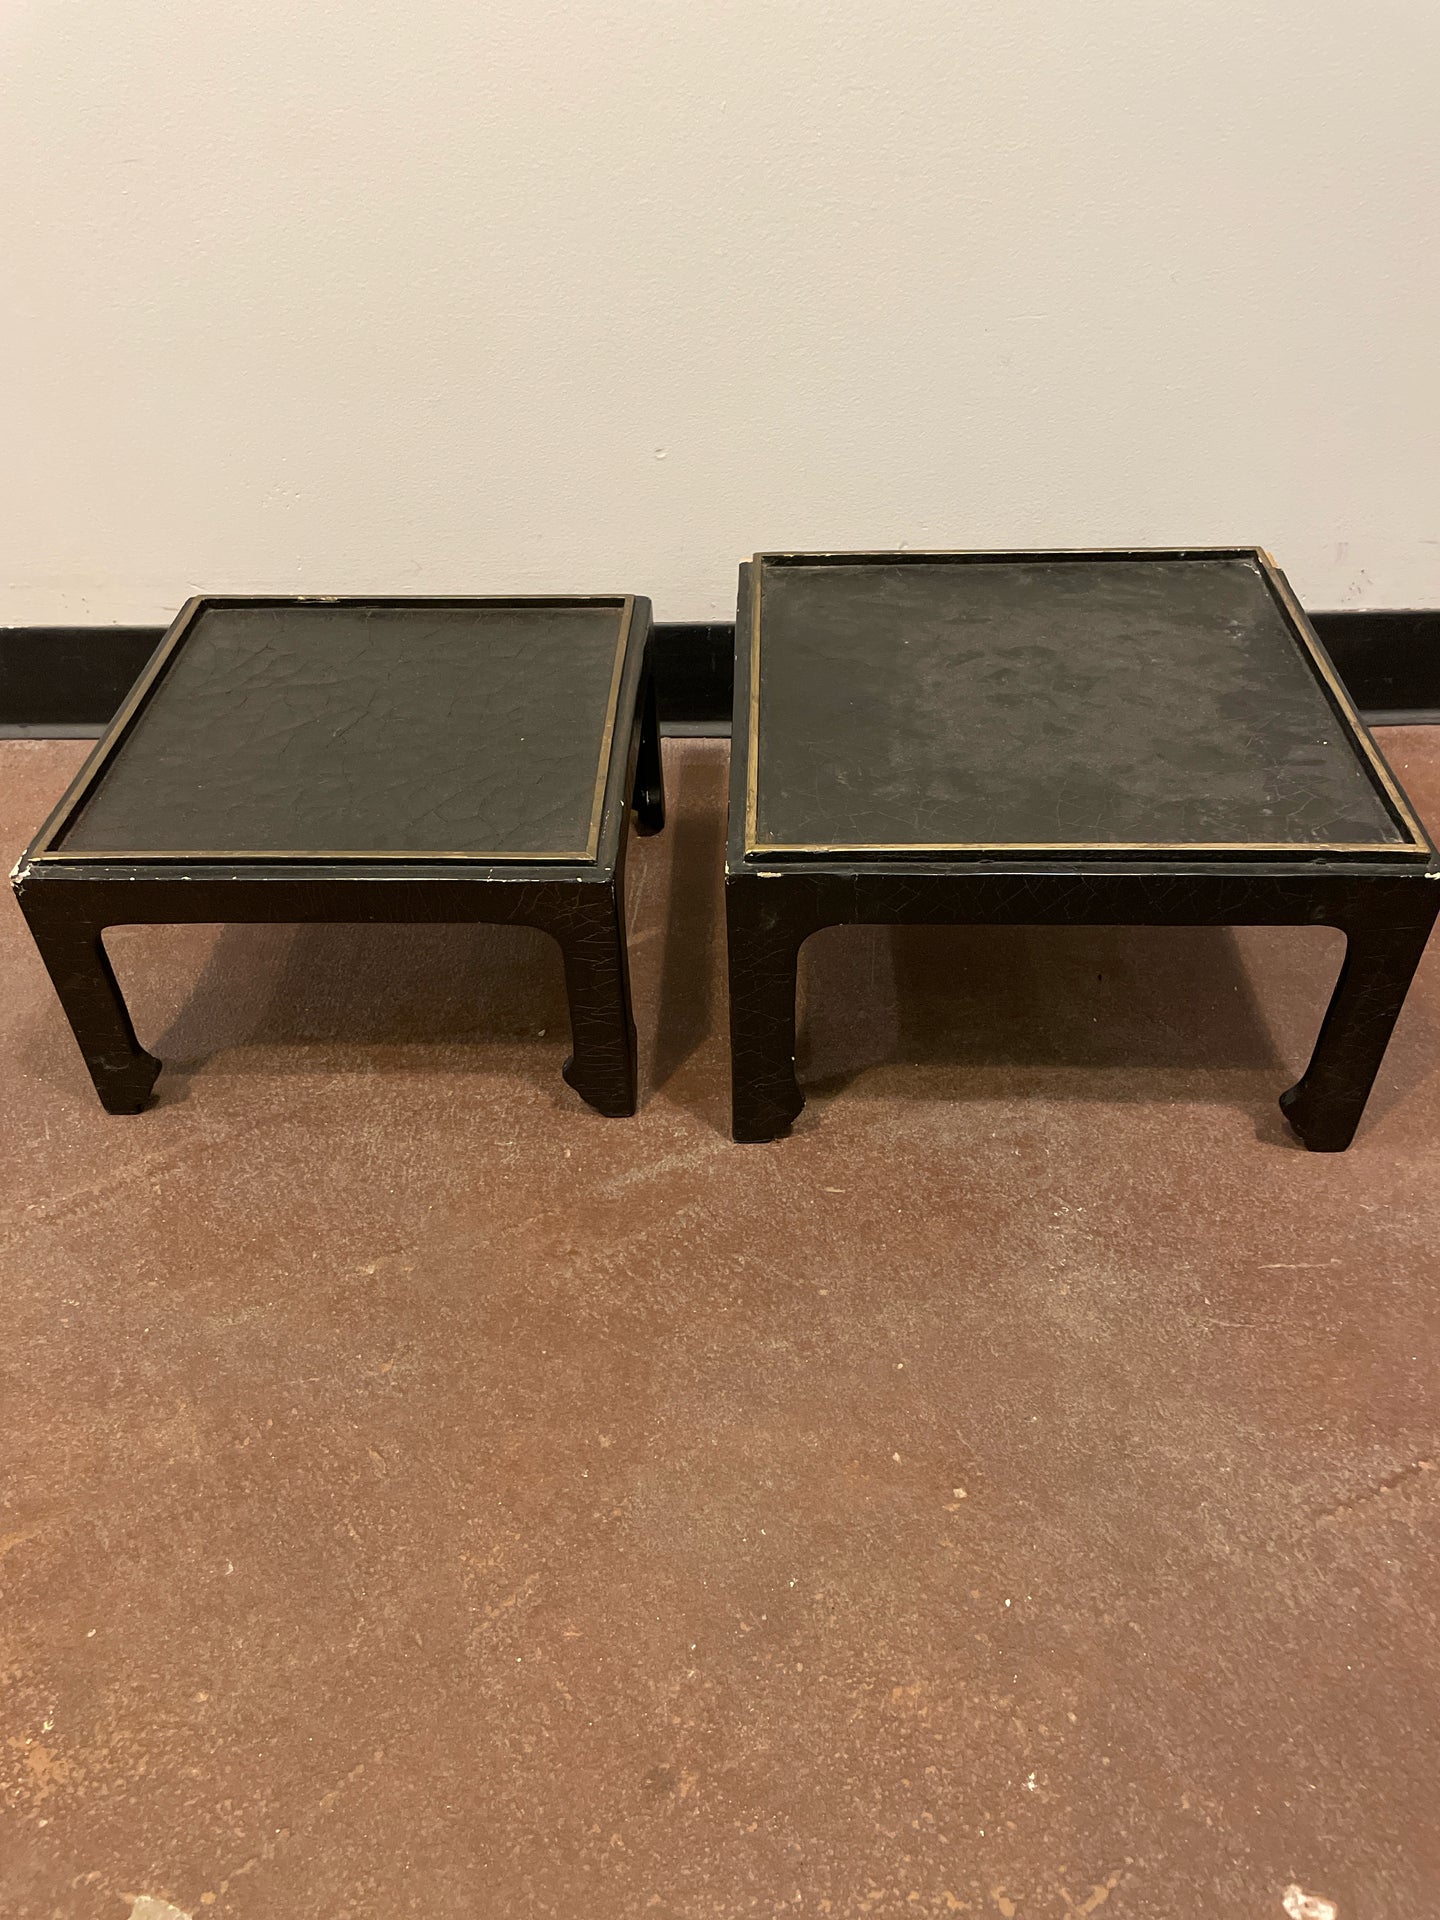 Set of 2 Black Wood Low Stacking Tables from Milling Road for Baker